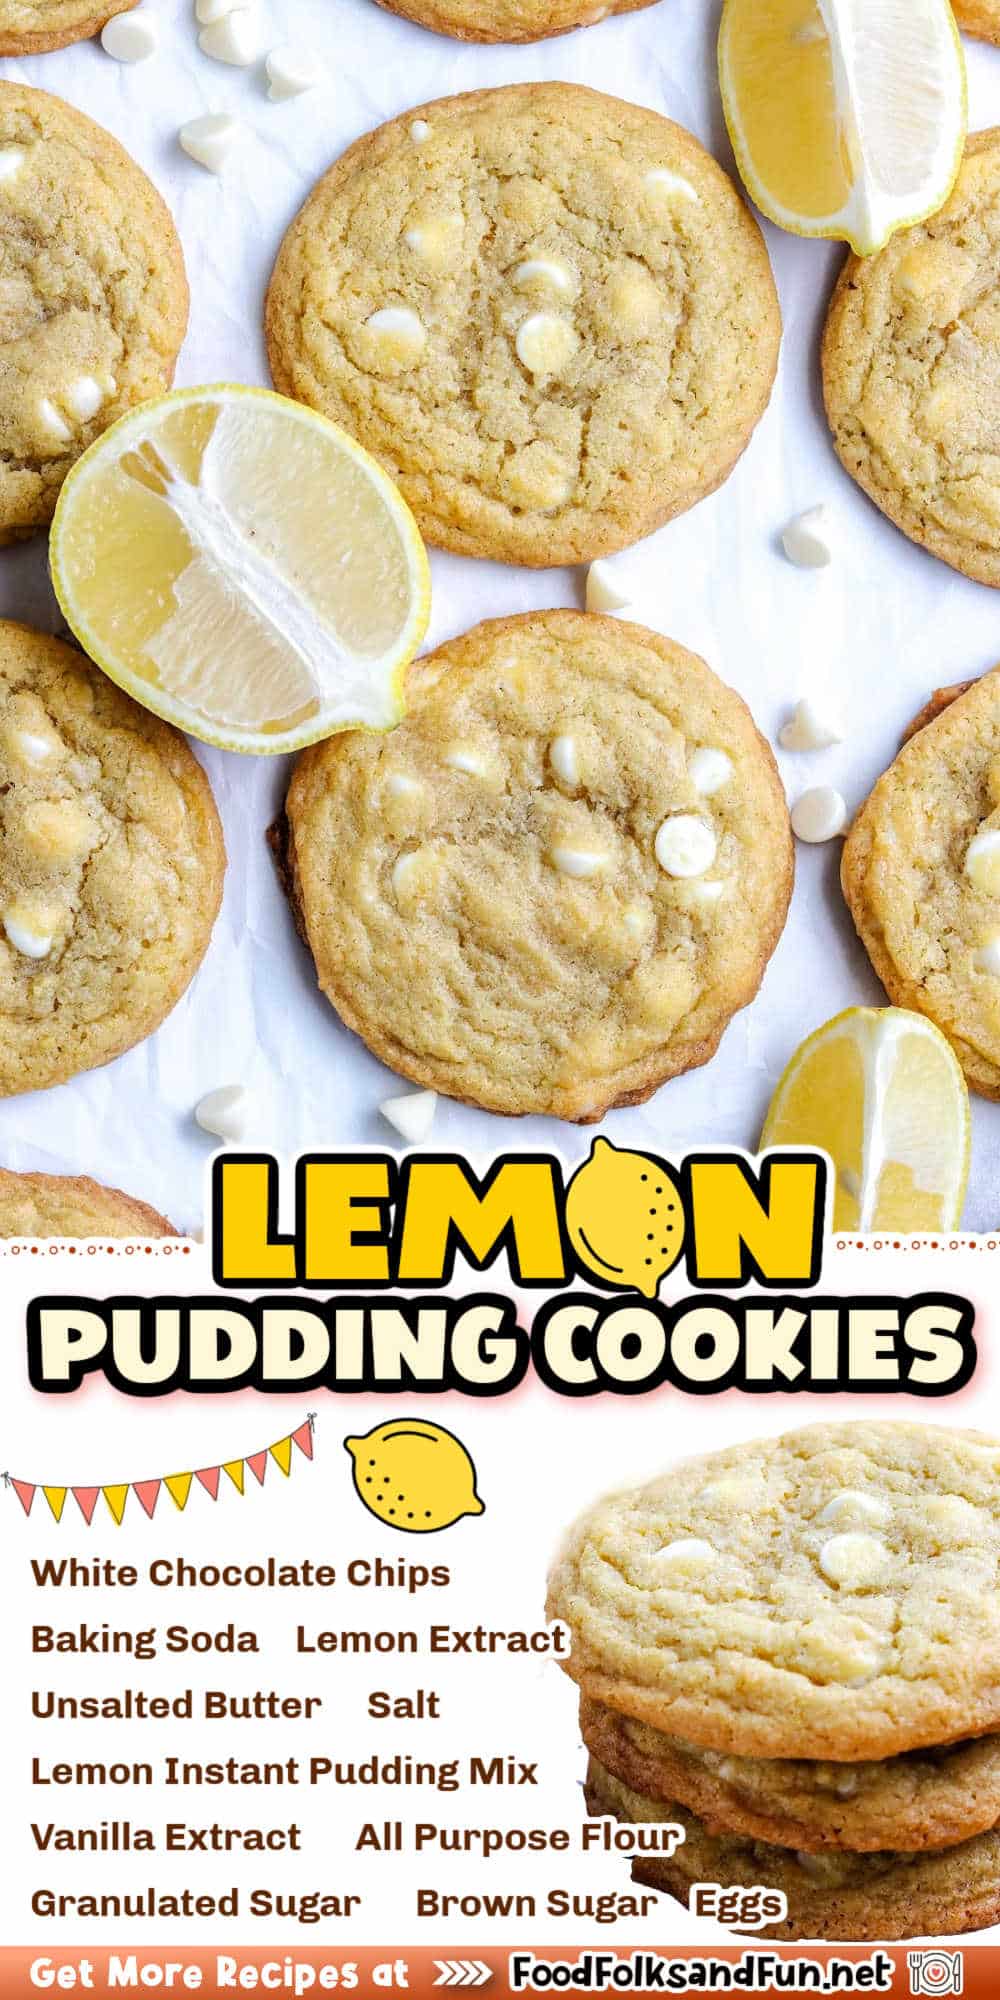 This Lemon Pudding Cookies recipe has a delicious zesty lemon flavor, and they're studded with creamy white chocolate chips. via @foodfolksandfun